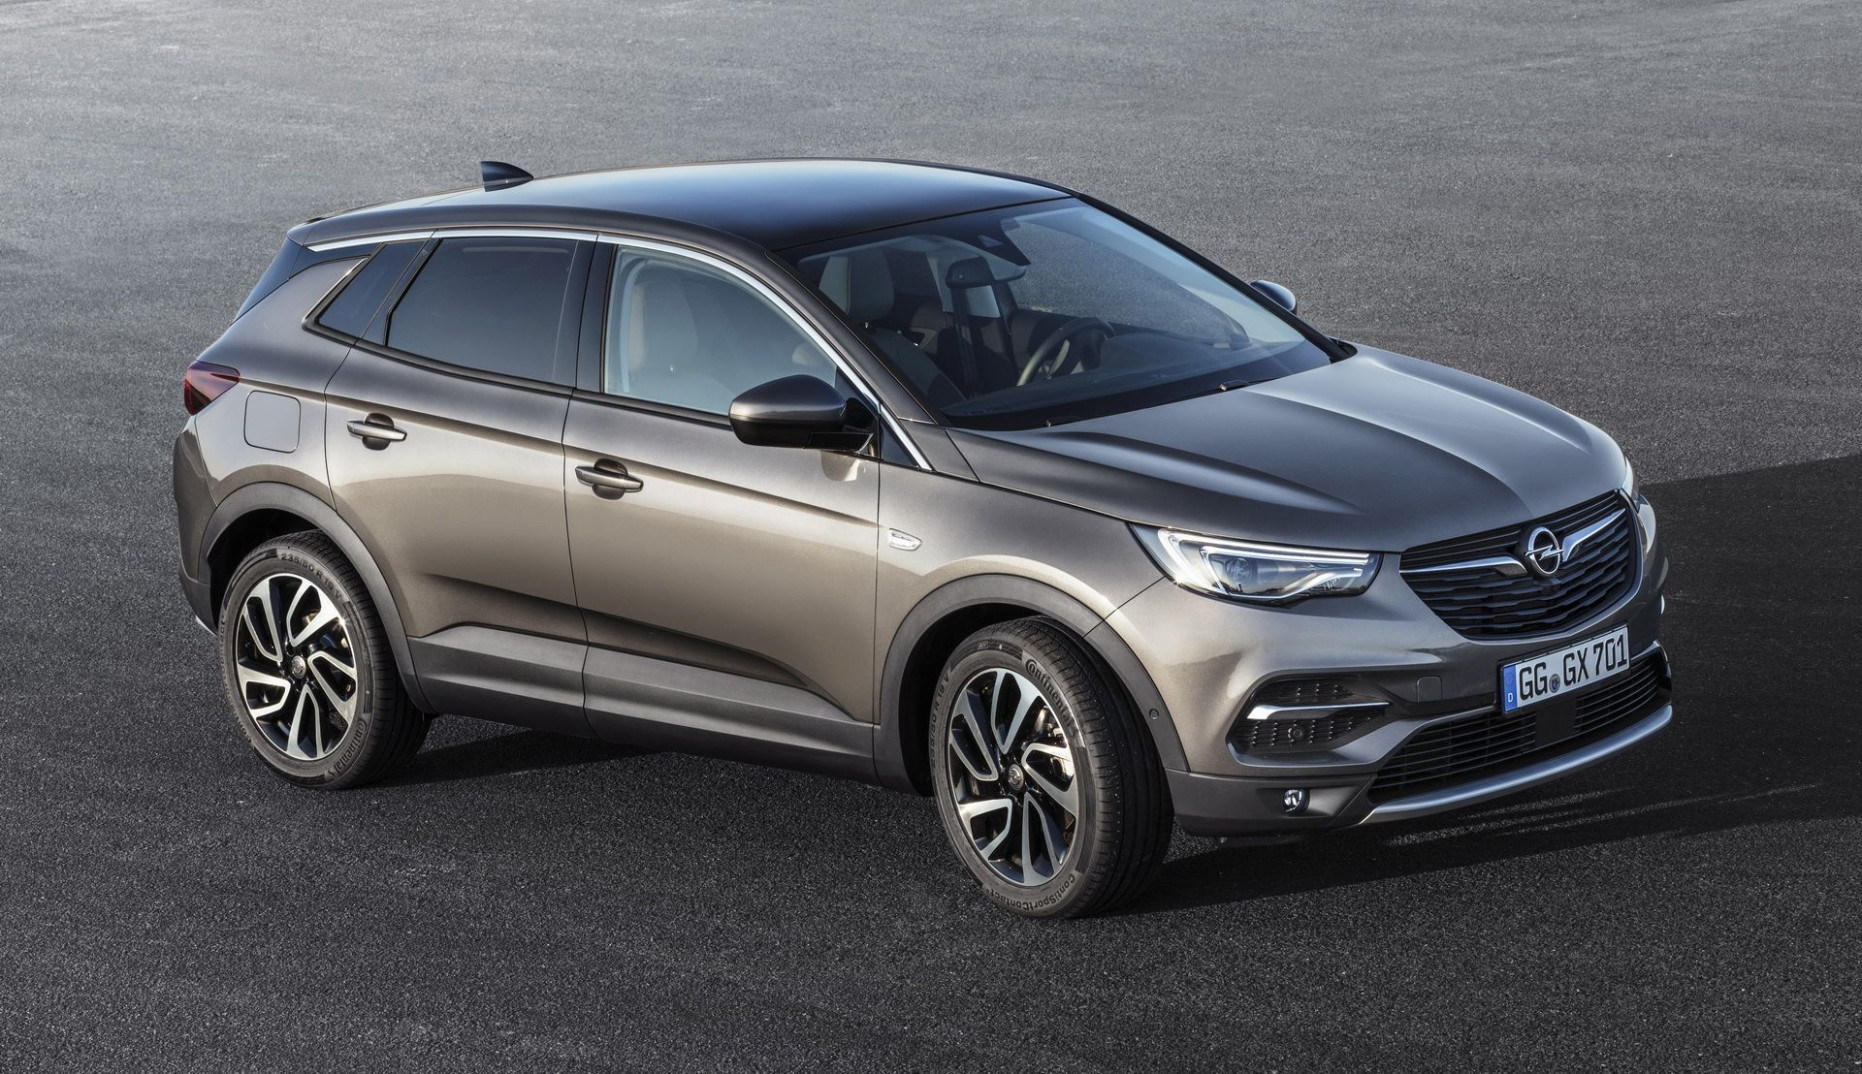 Redesign and Concept Nuovo Suv Opel 2022